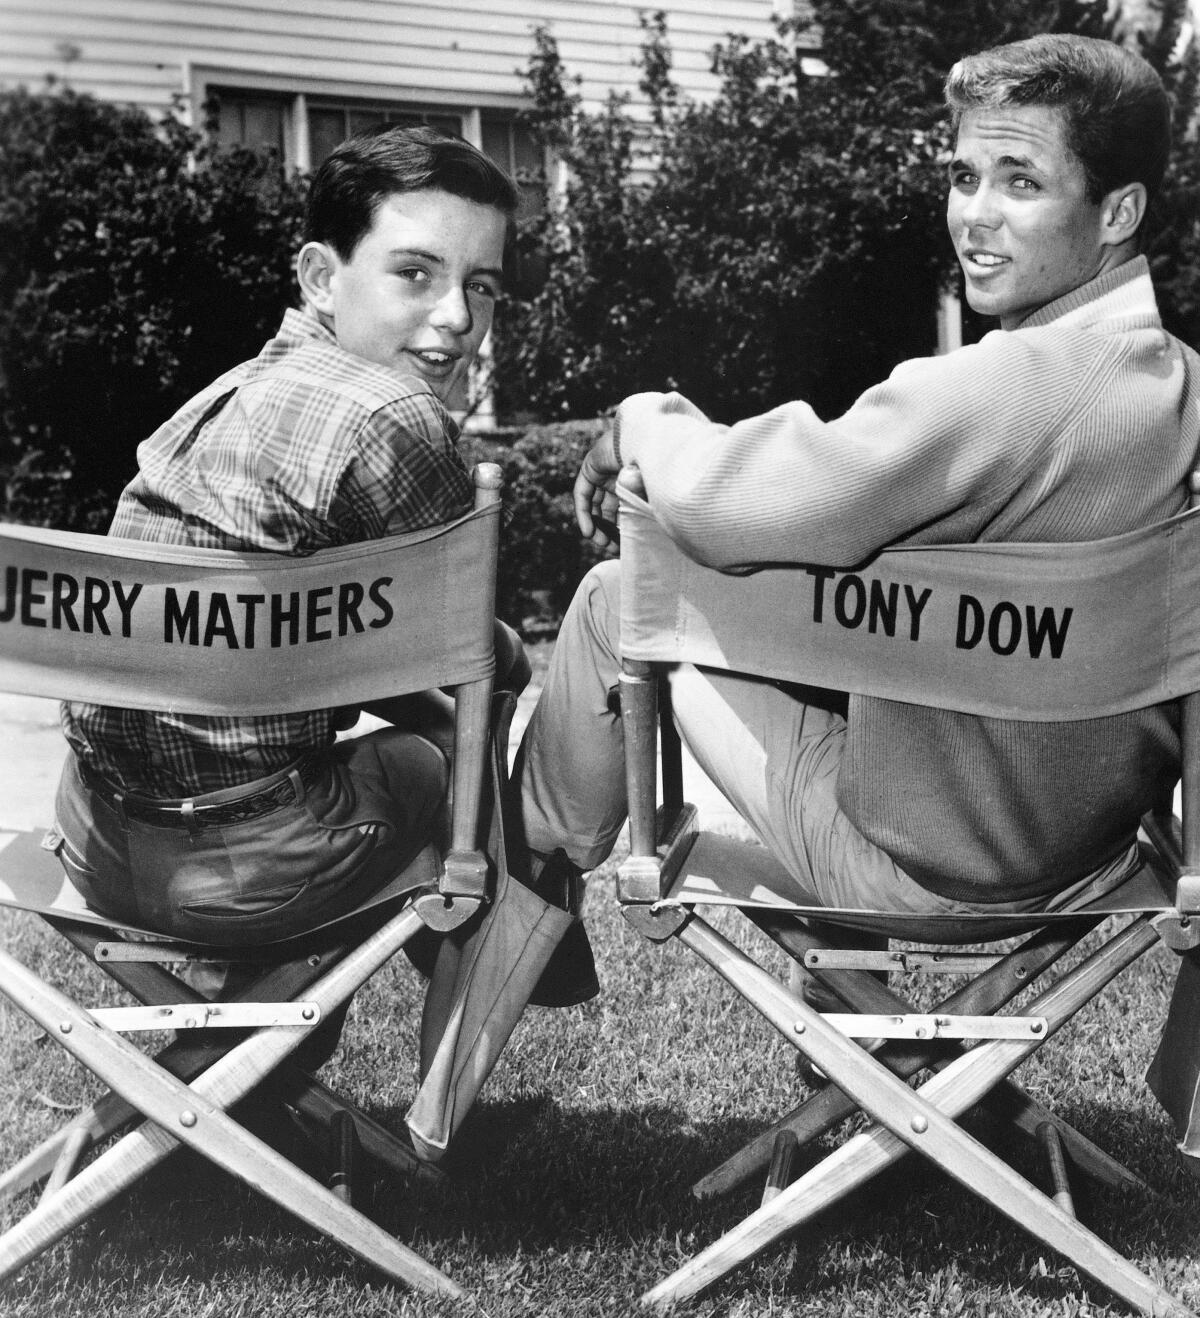 Two young men sitting in director's chairs and looking back at the camera.